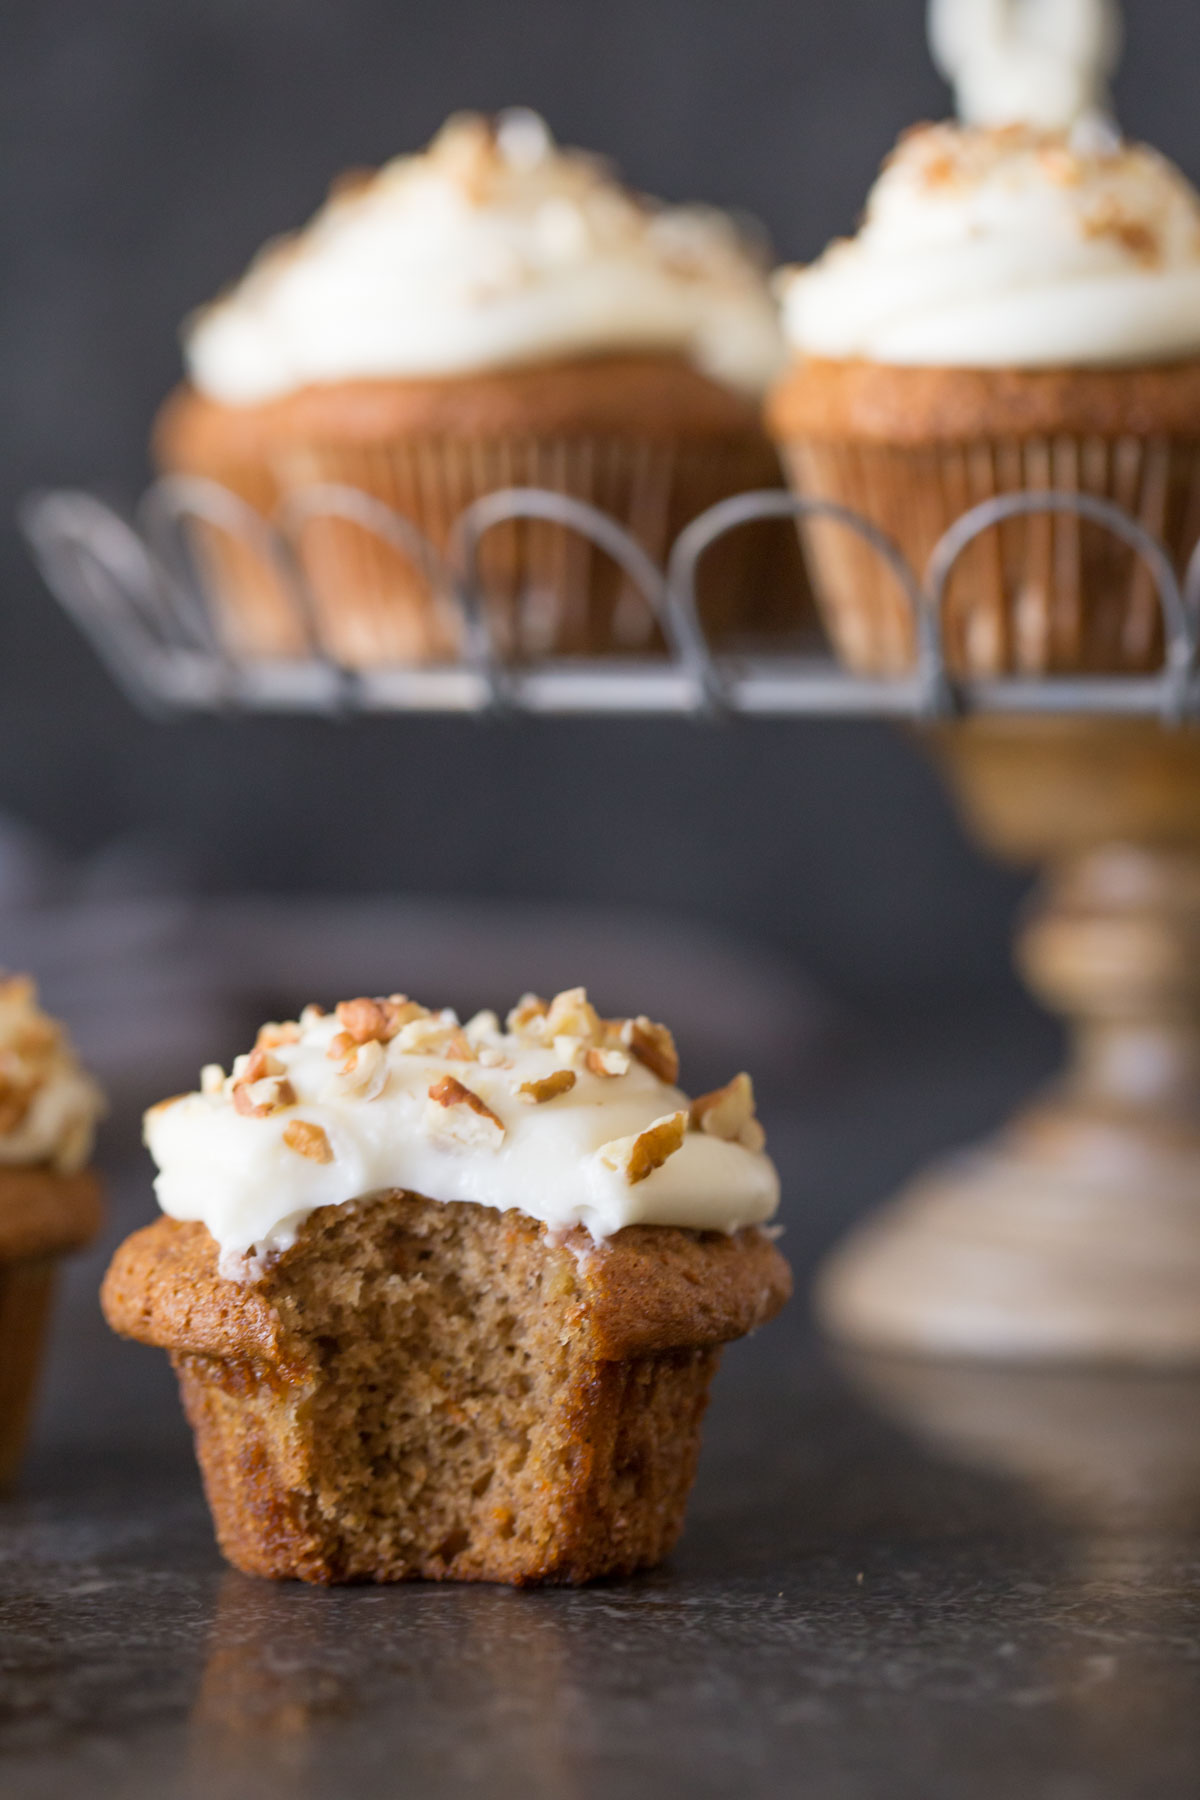 A Carrot Cake Cupcake with a bite taken out of it, with more Carrot Cake Cupcakes on a cake stand in the background. 